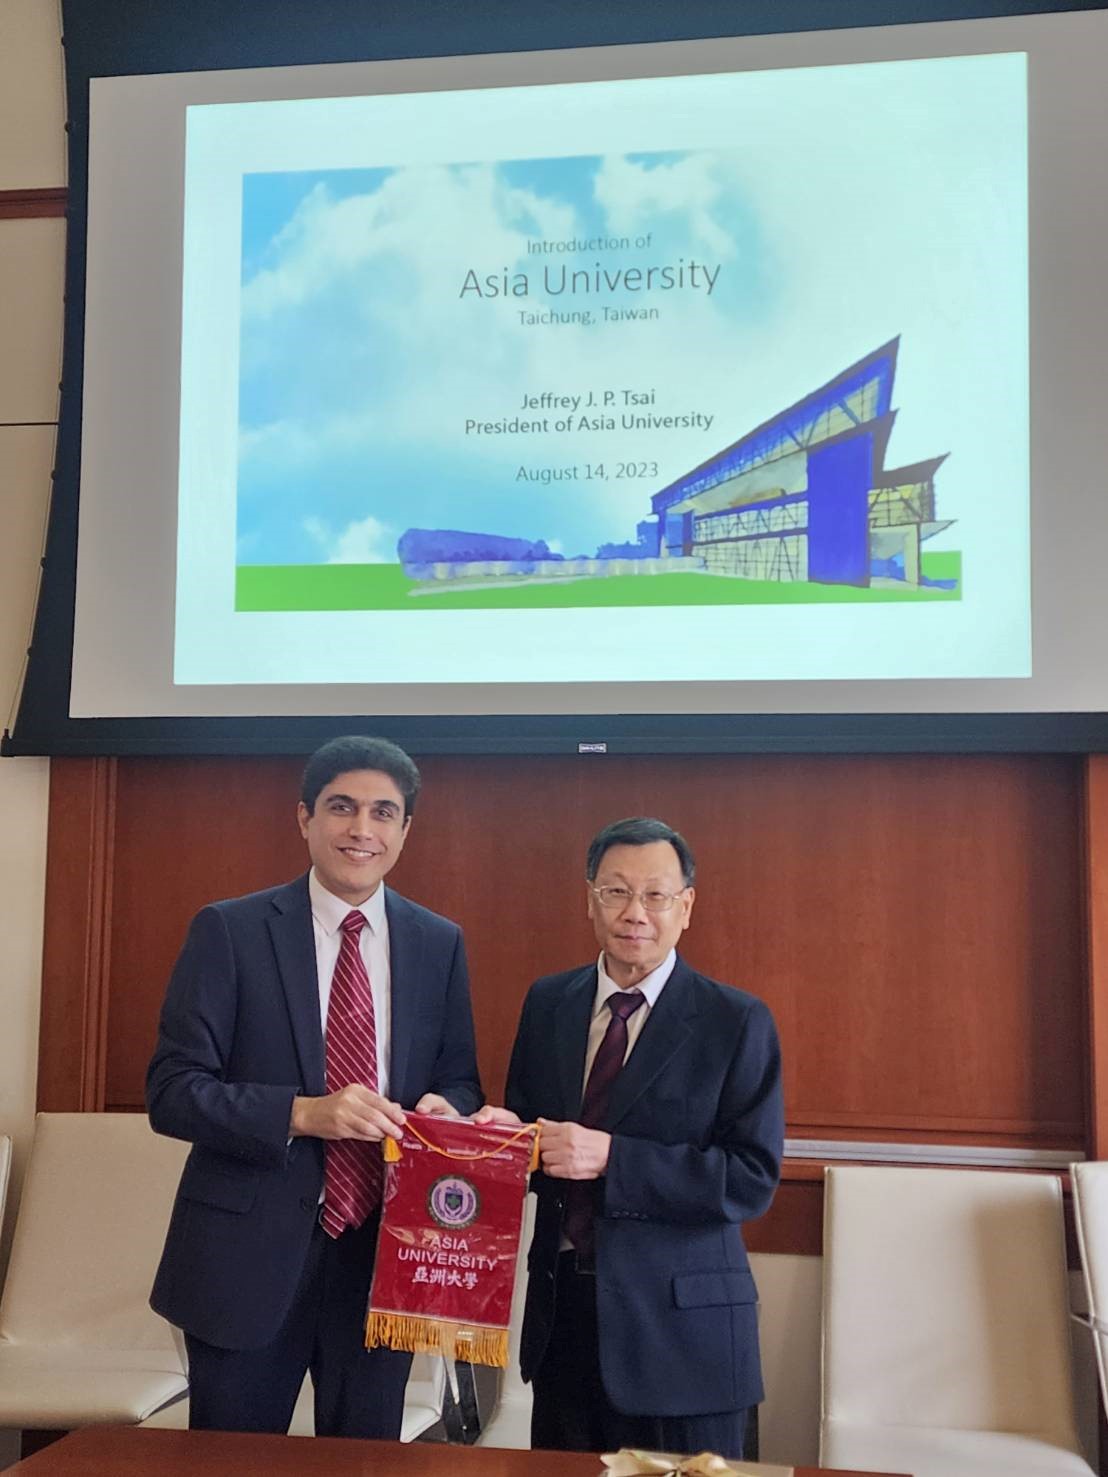 President Jeffrey J.P. Tsai of Asia University (right) visits the International Center for Genetic Disease at Harvard University in the United States and meets with the founding director of the center, Prof. Alireza Haghighi.